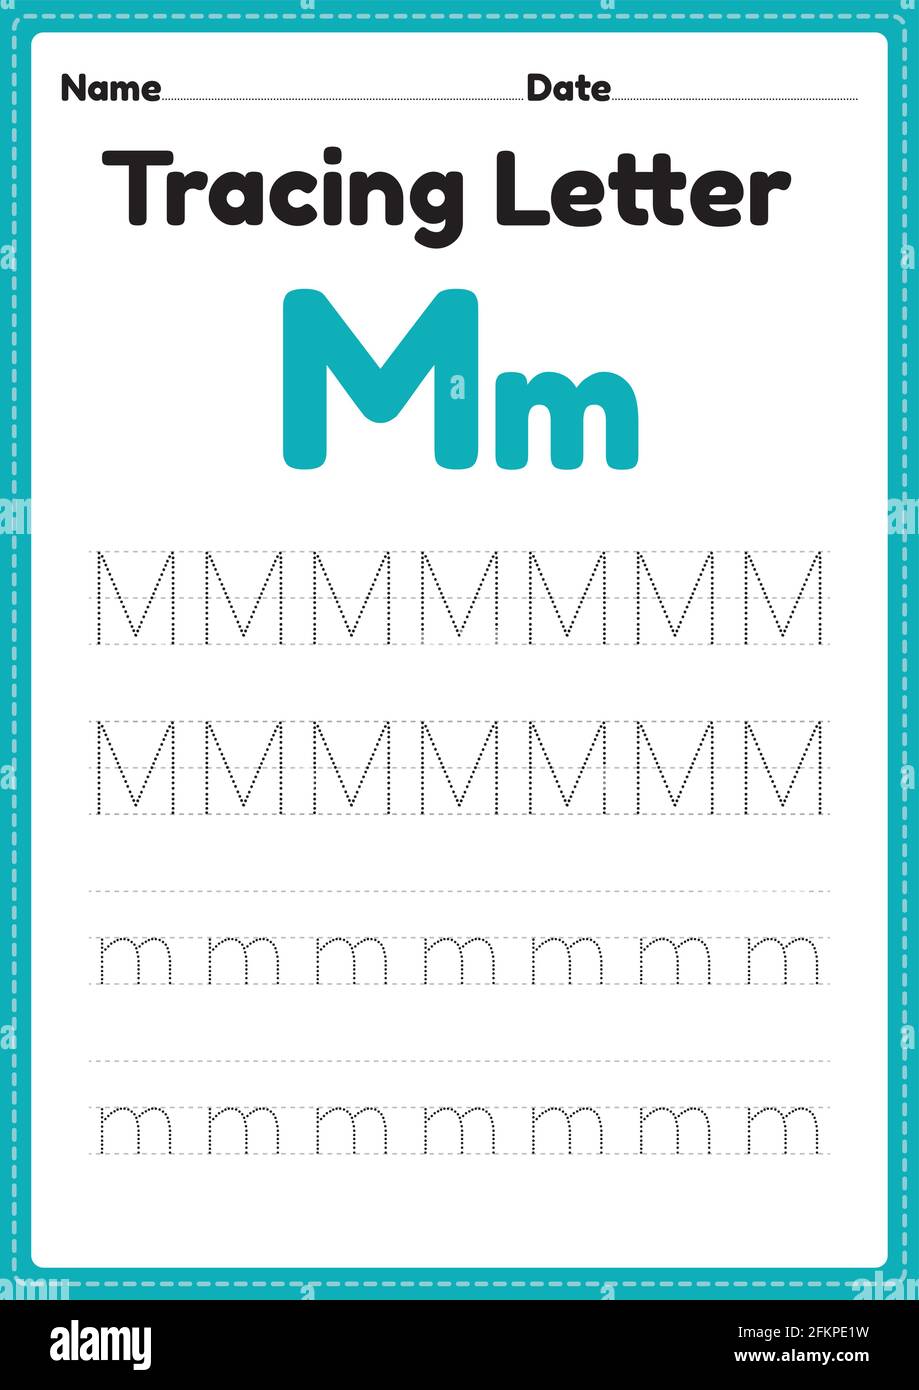 tracing letter m alphabet worksheet for kindergarten and preschool kids for handwriting practice and educational activities in a printable page illust stock vector image art alamy